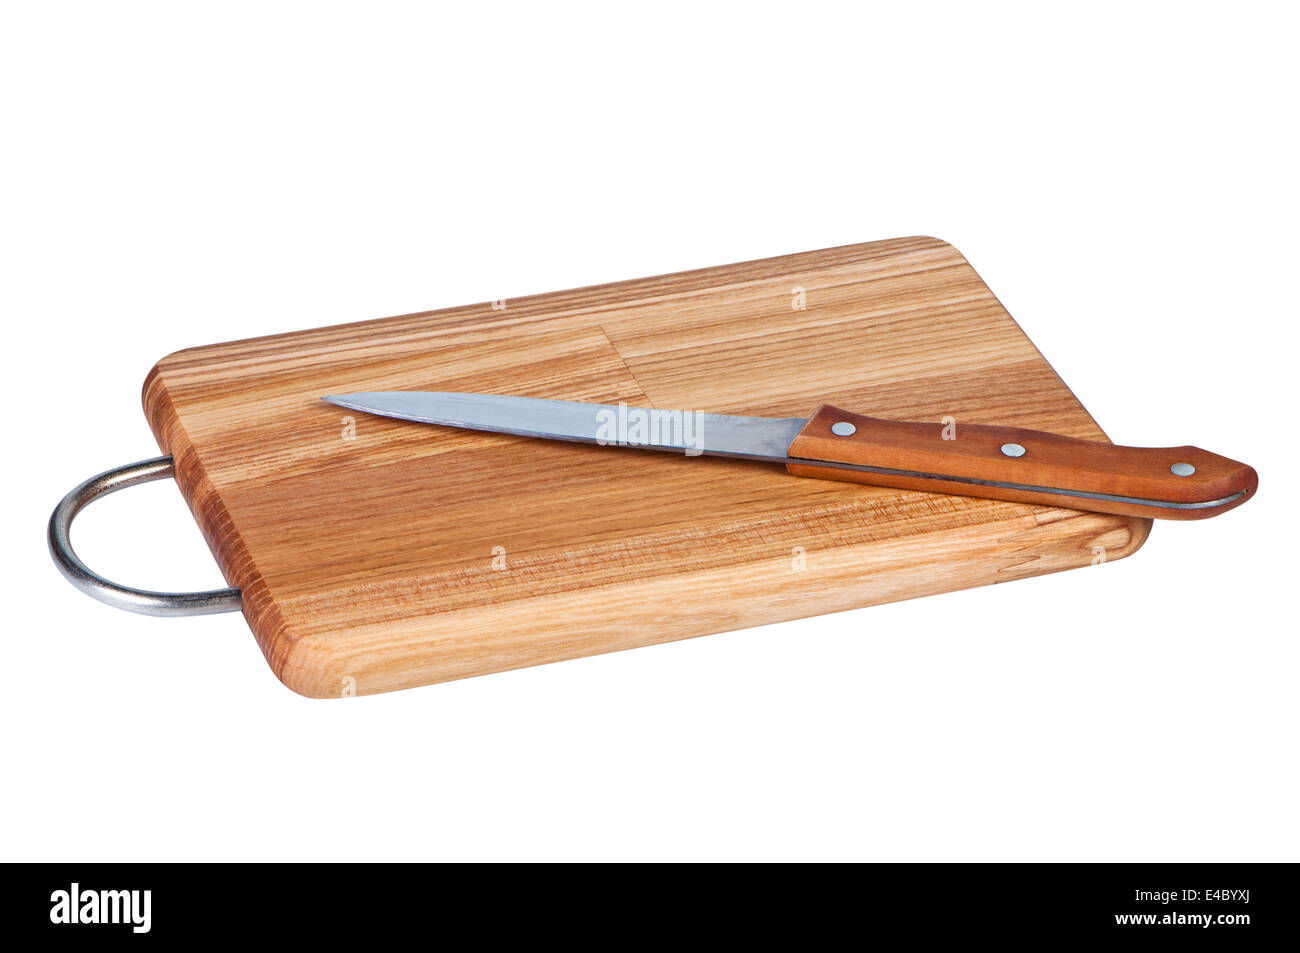 Wooden board with kitchen knife. Stock Photo